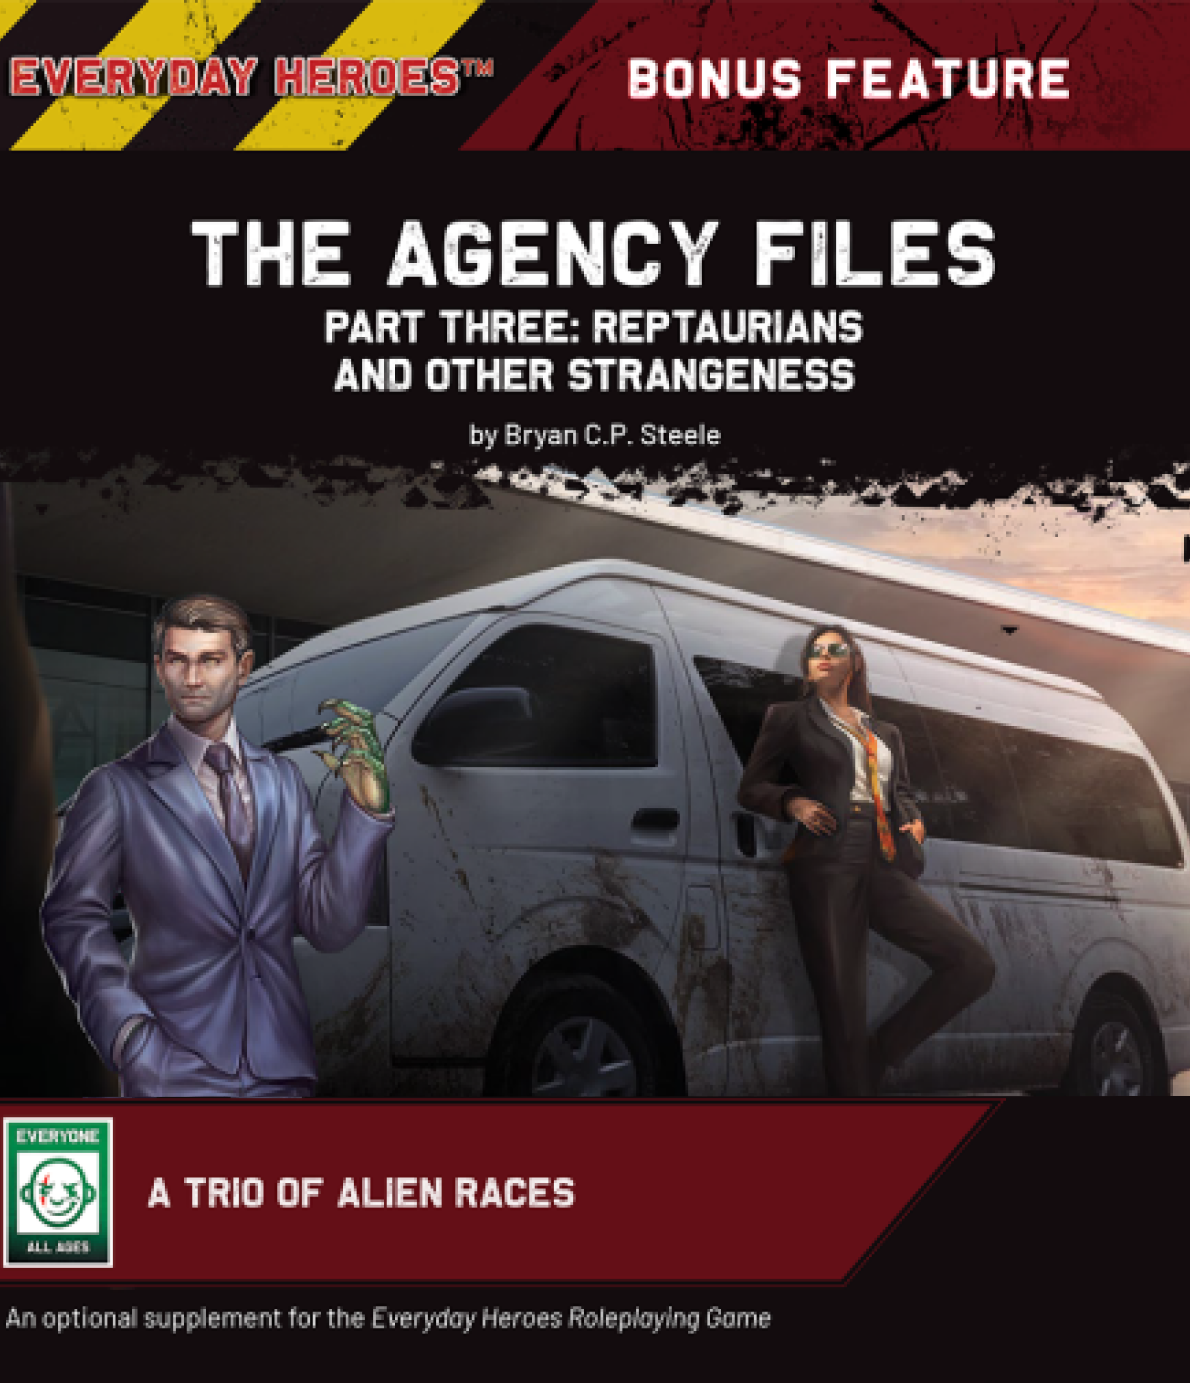 The Agency Files - Part Three: Reptaurians and Other Strangeness